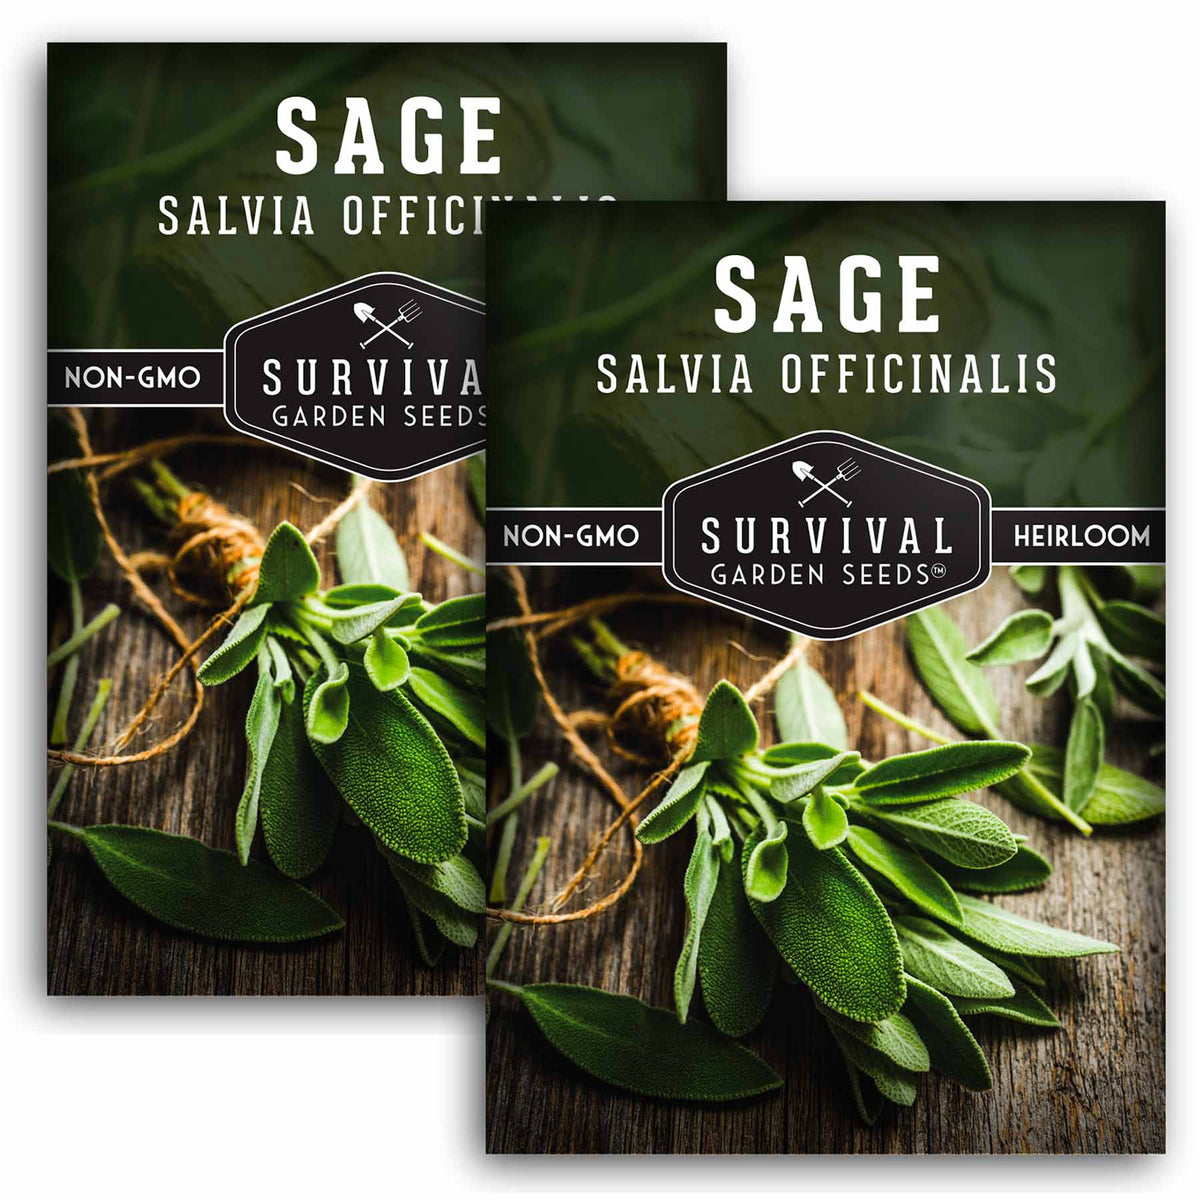 2 packets of Sage seeds